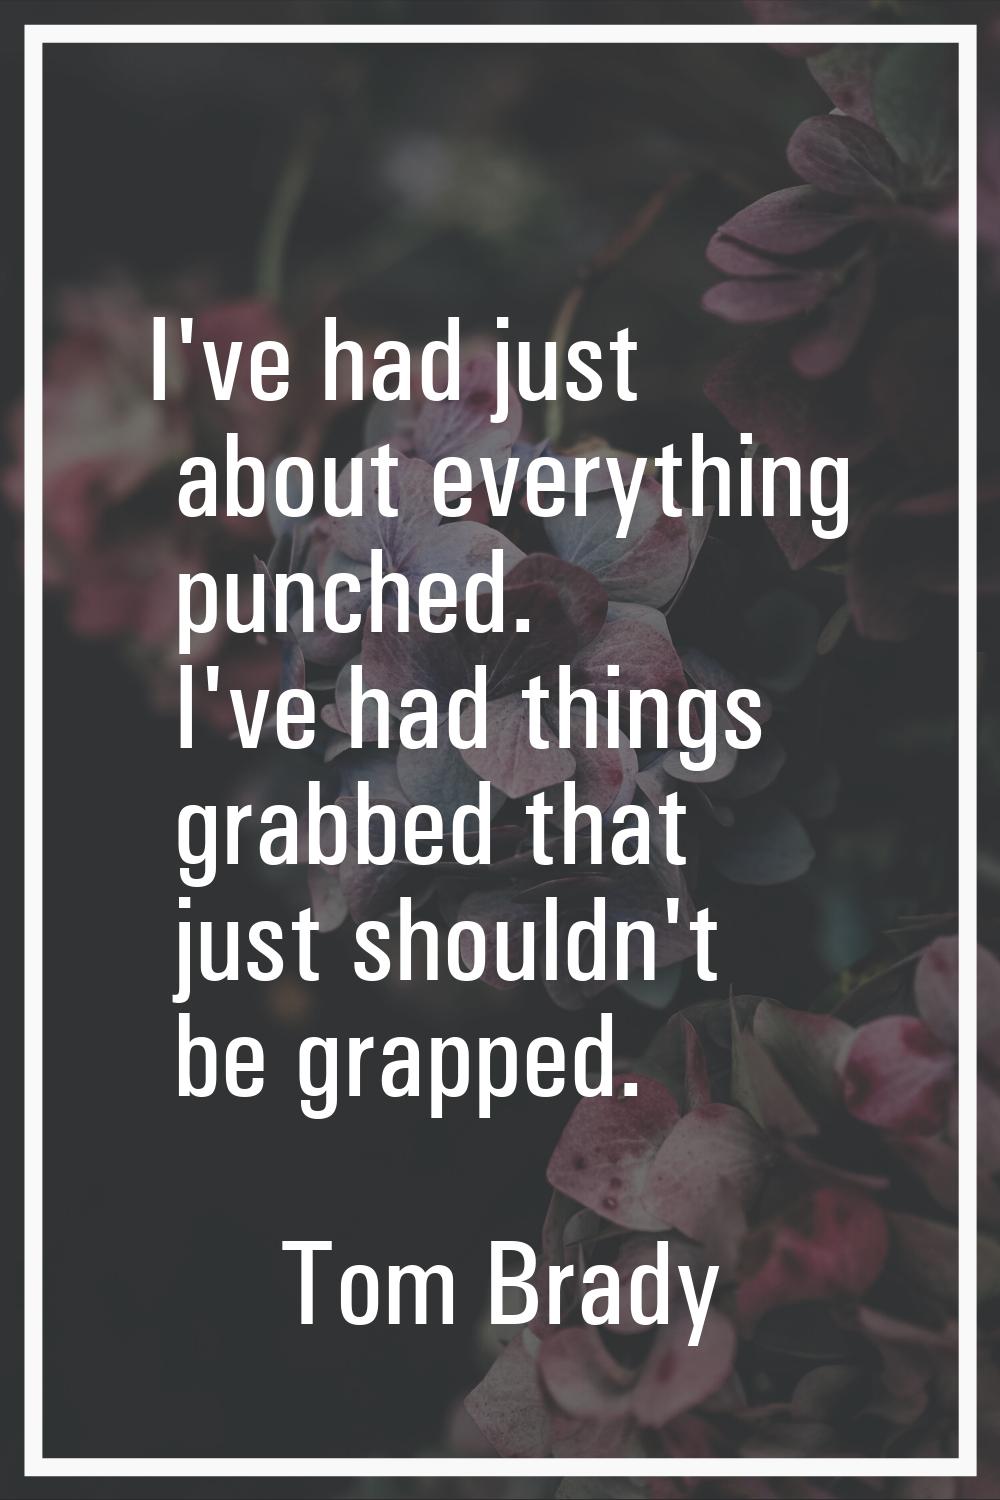 I've had just about everything punched. I've had things grabbed that just shouldn't be grapped.